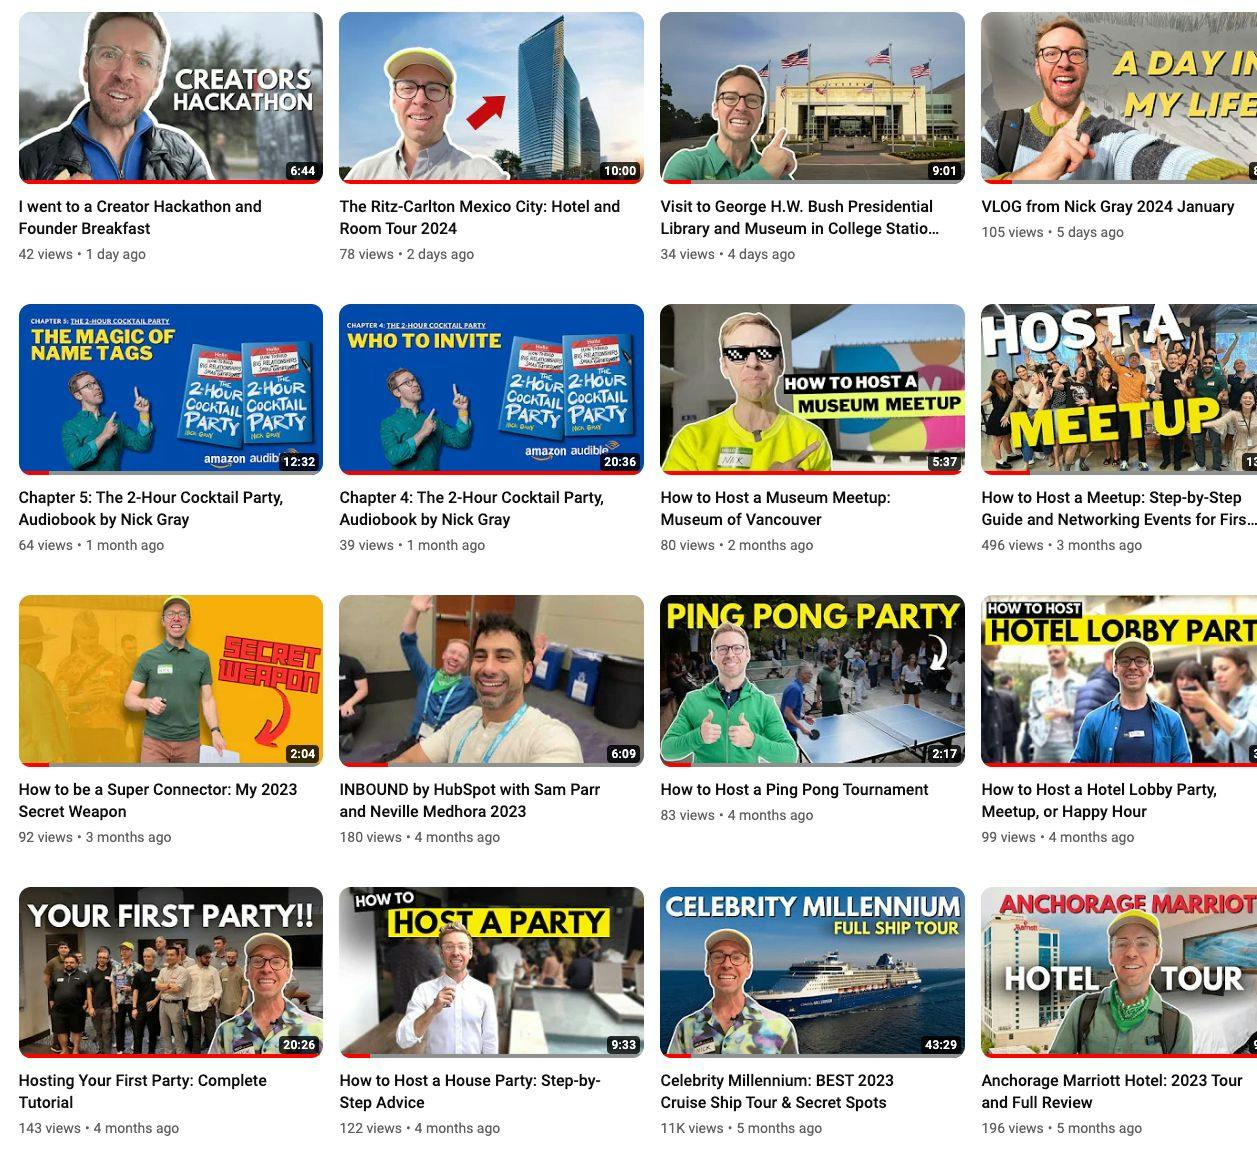 A screenshot showing the YouTube channel page of Nick Gray